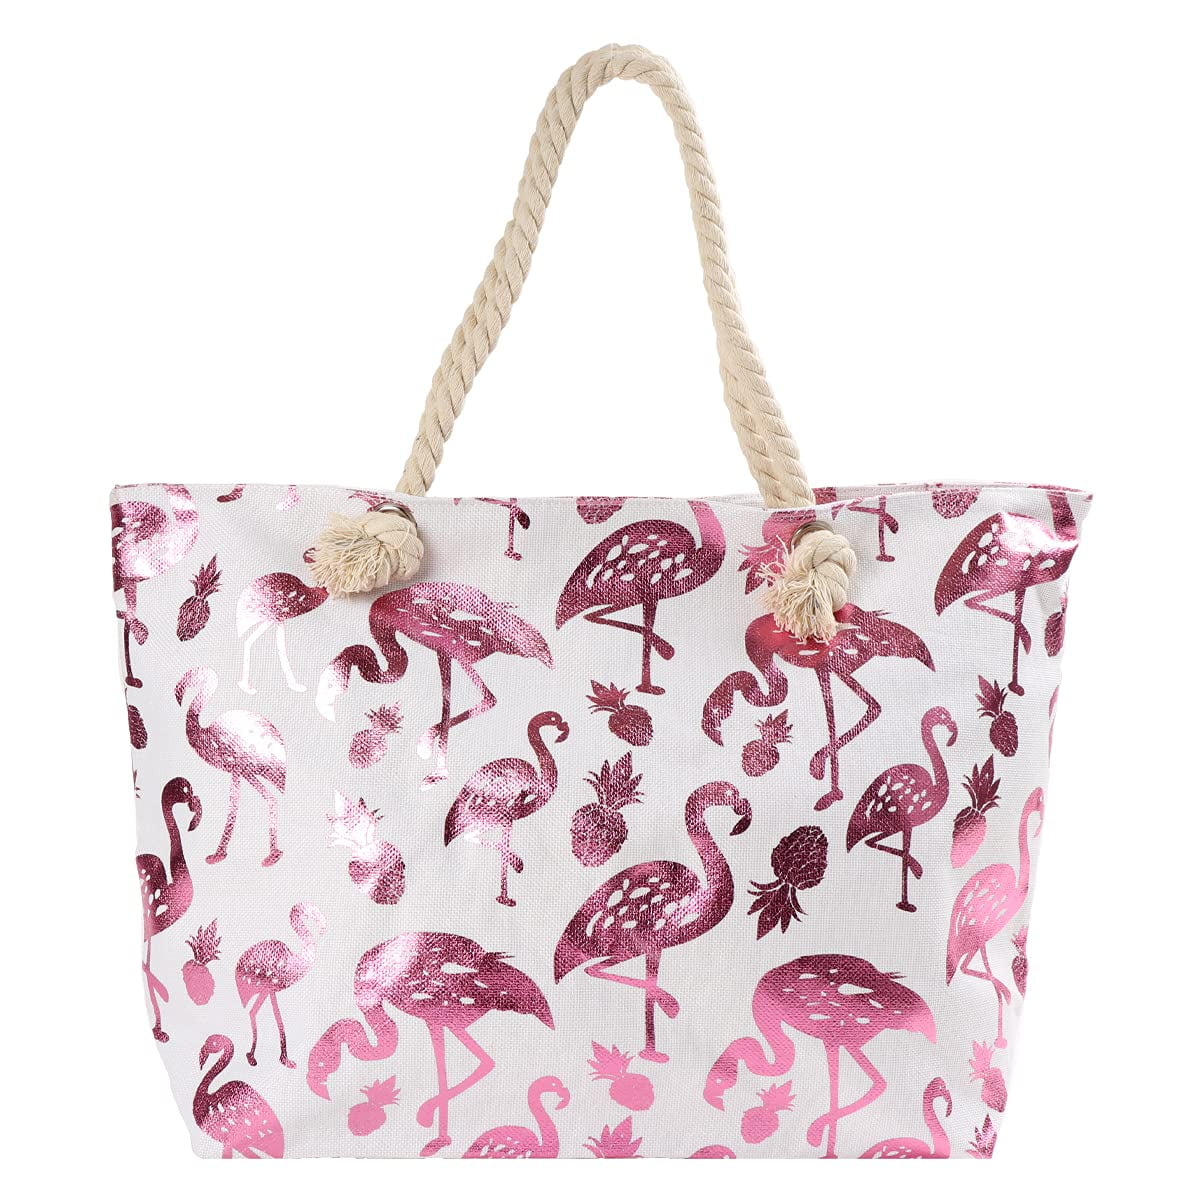 ZzWwR Tropical Pink Flamingos Pattern Extra Large Canvas Shoulder Tote Top Storage Handle Bag for Gym Beach Weekender Travel Reusable Grocery Shopping 